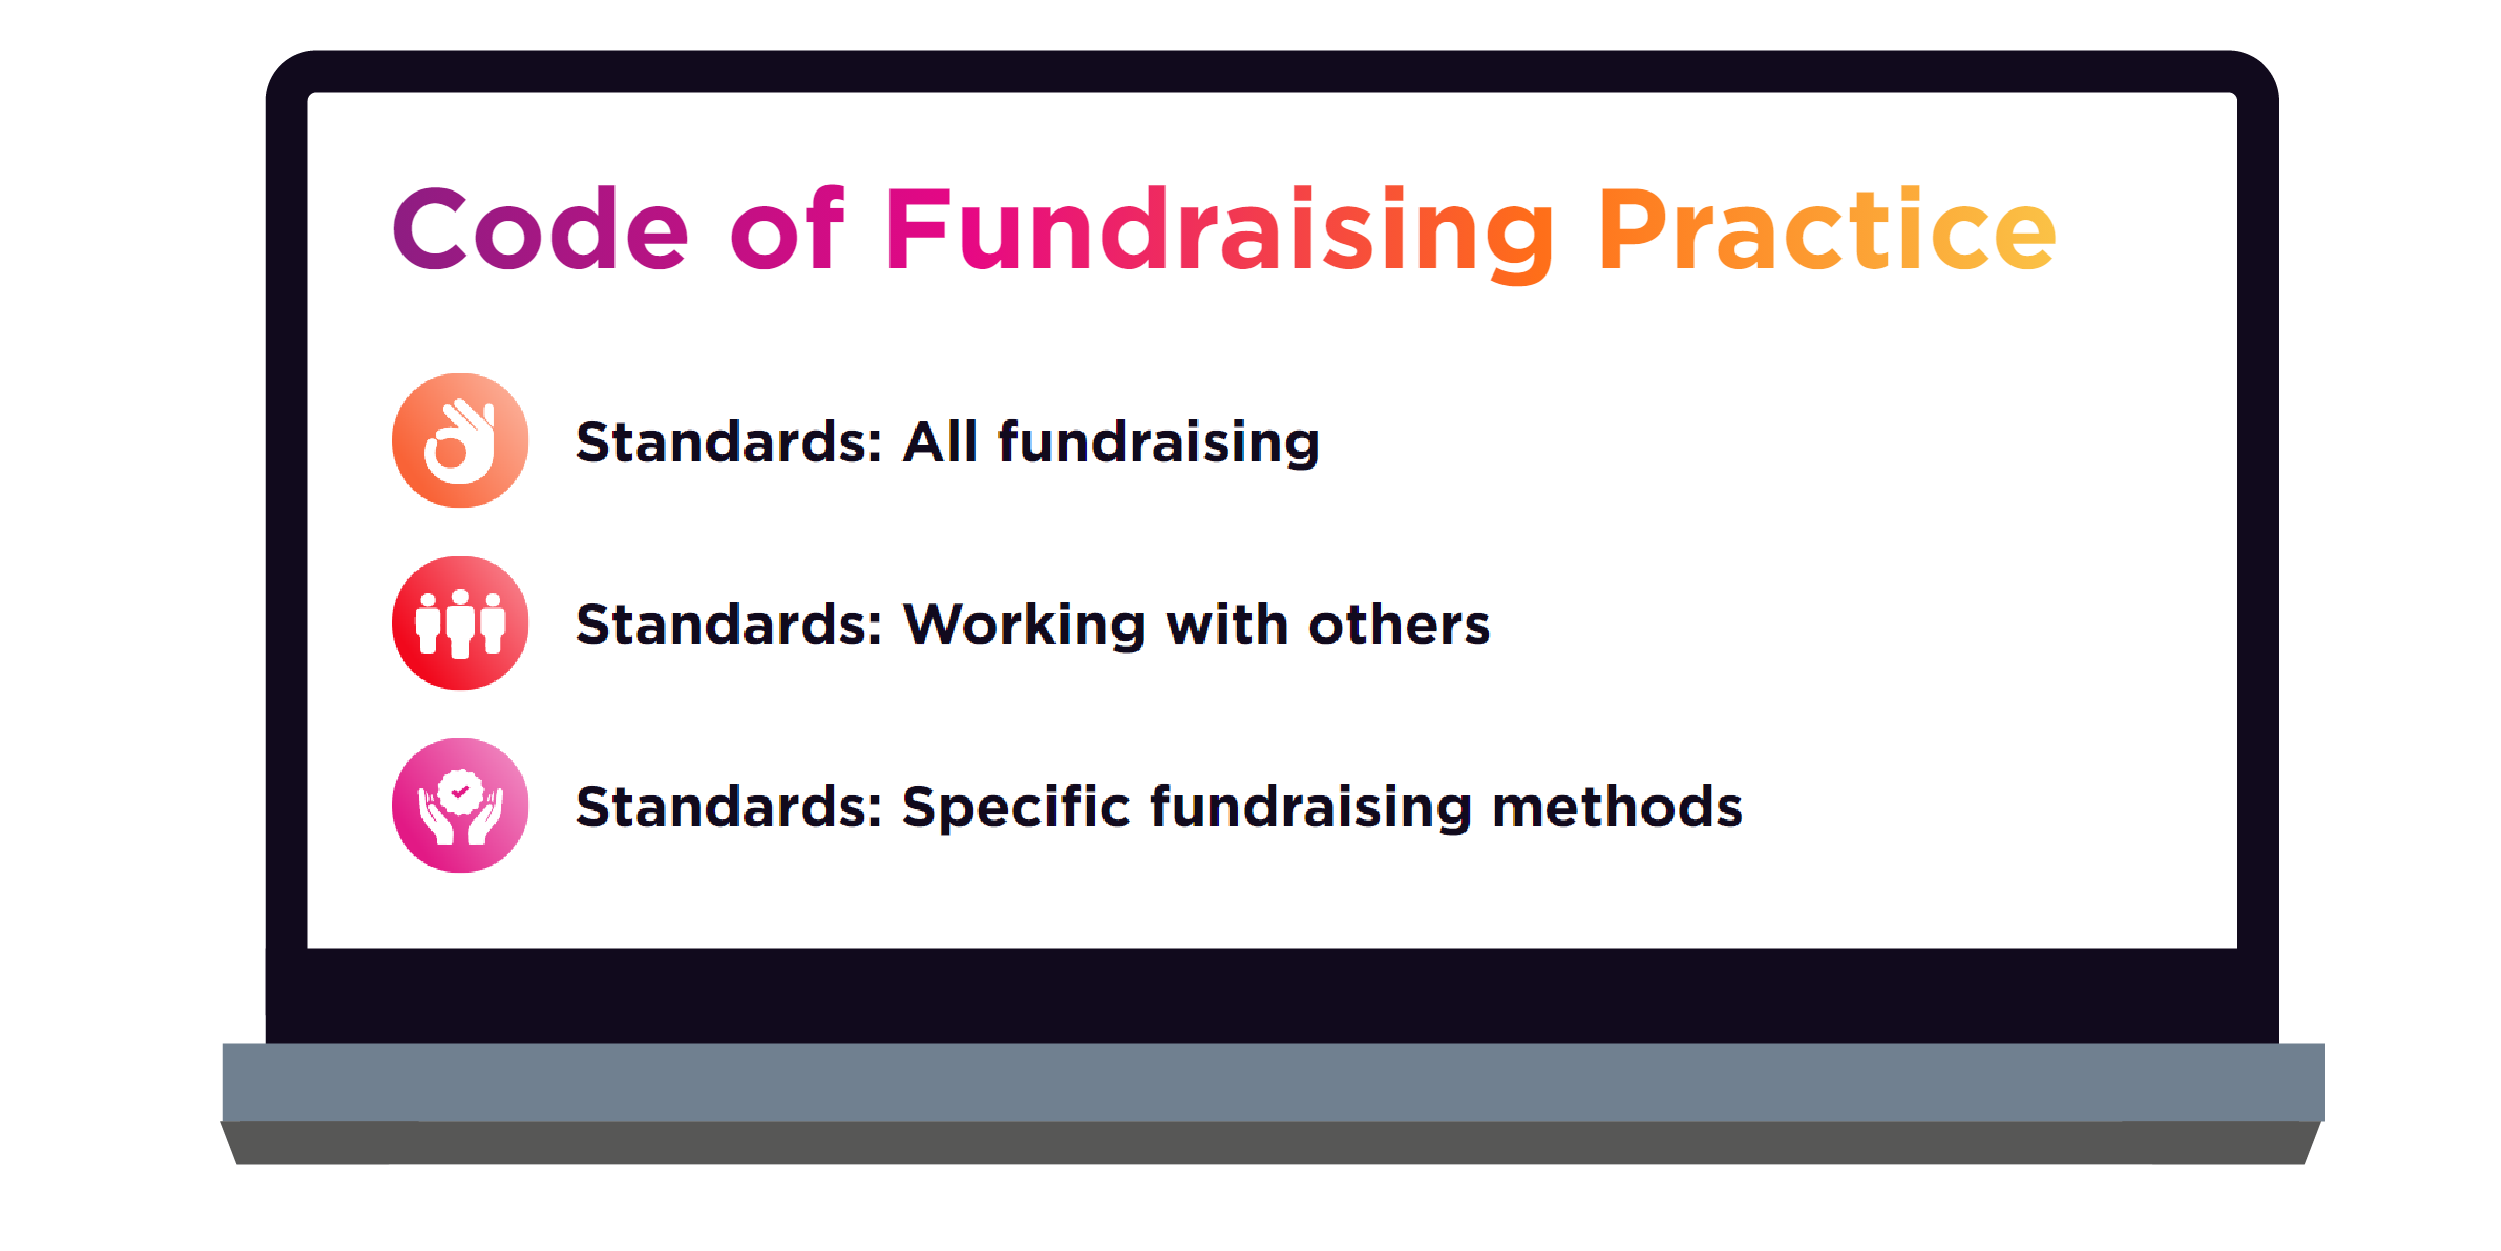 Image shows screenshot of Code of Fundraising Practice